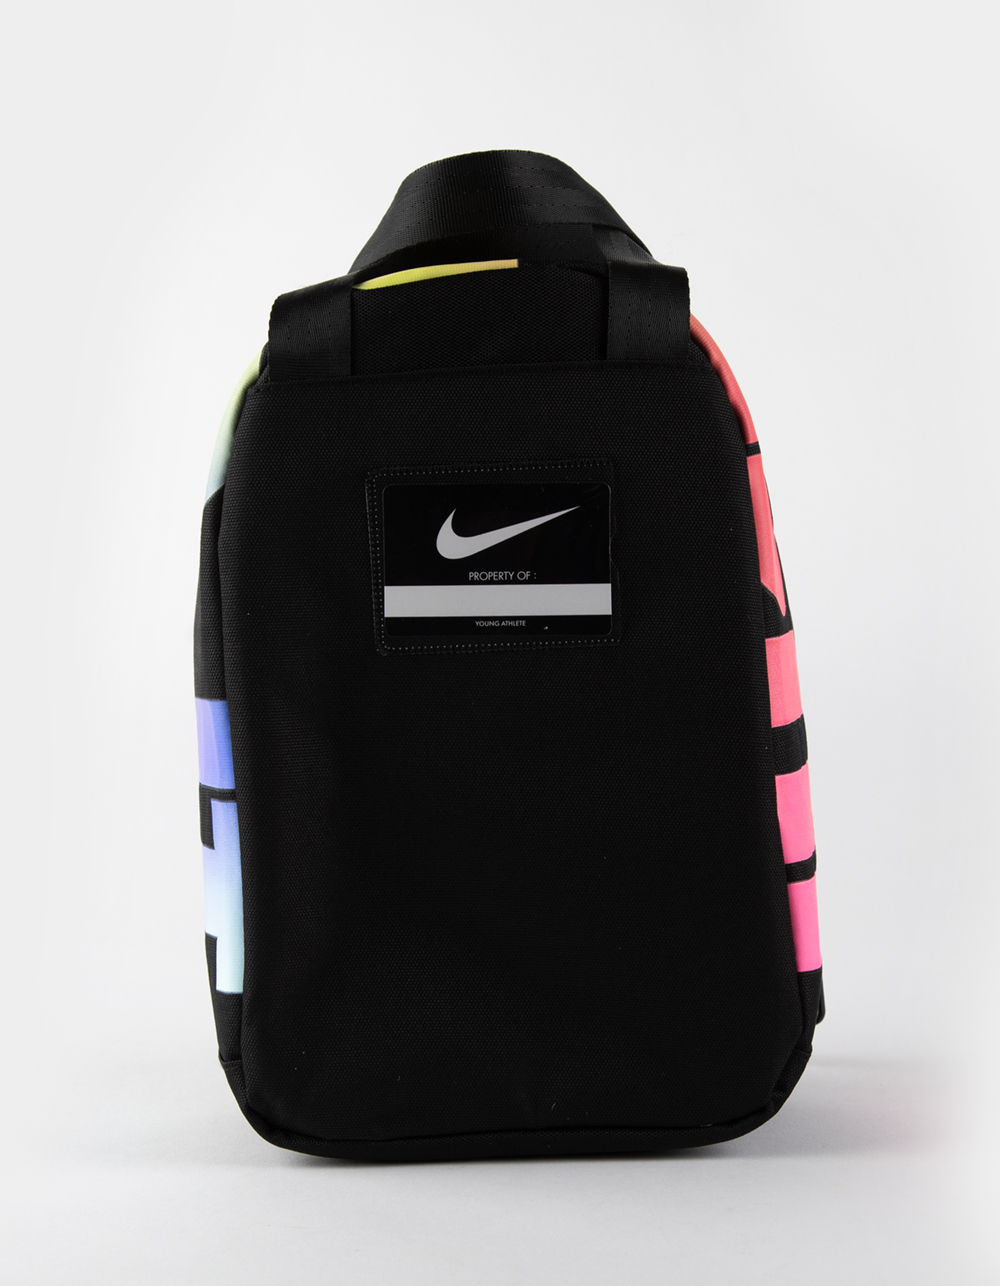 Nike Brasilia Fuel Insulated Lunch Pack